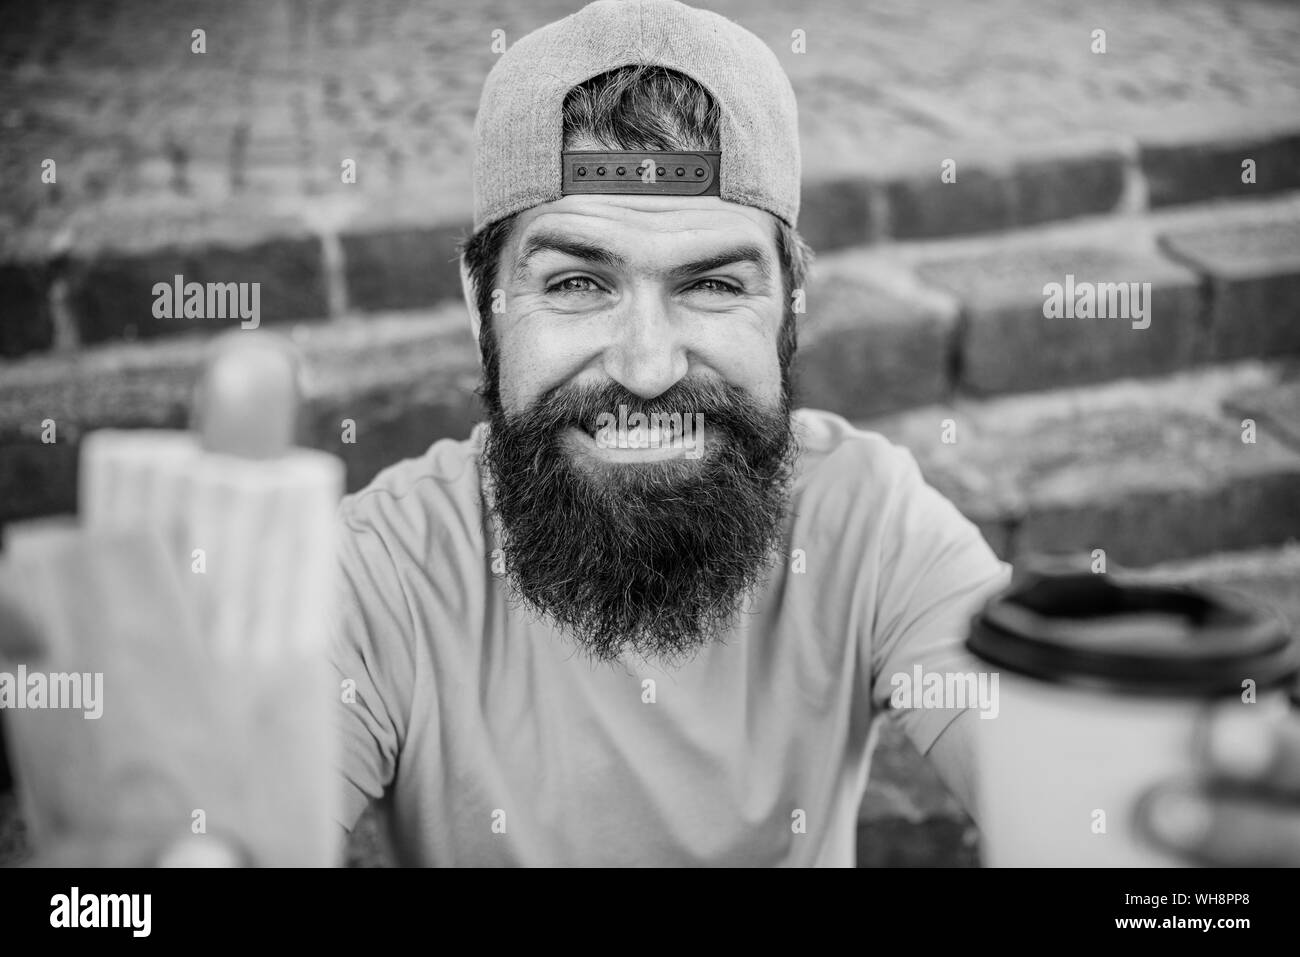 Man bearded eat tasty sausage and drink paper cup. Urban lifestyle nutrition. Junk food. Carefree hipster eat junk food while sit stairs. Snack for good mood. Guy eating hot dog. Street food concept. Stock Photo